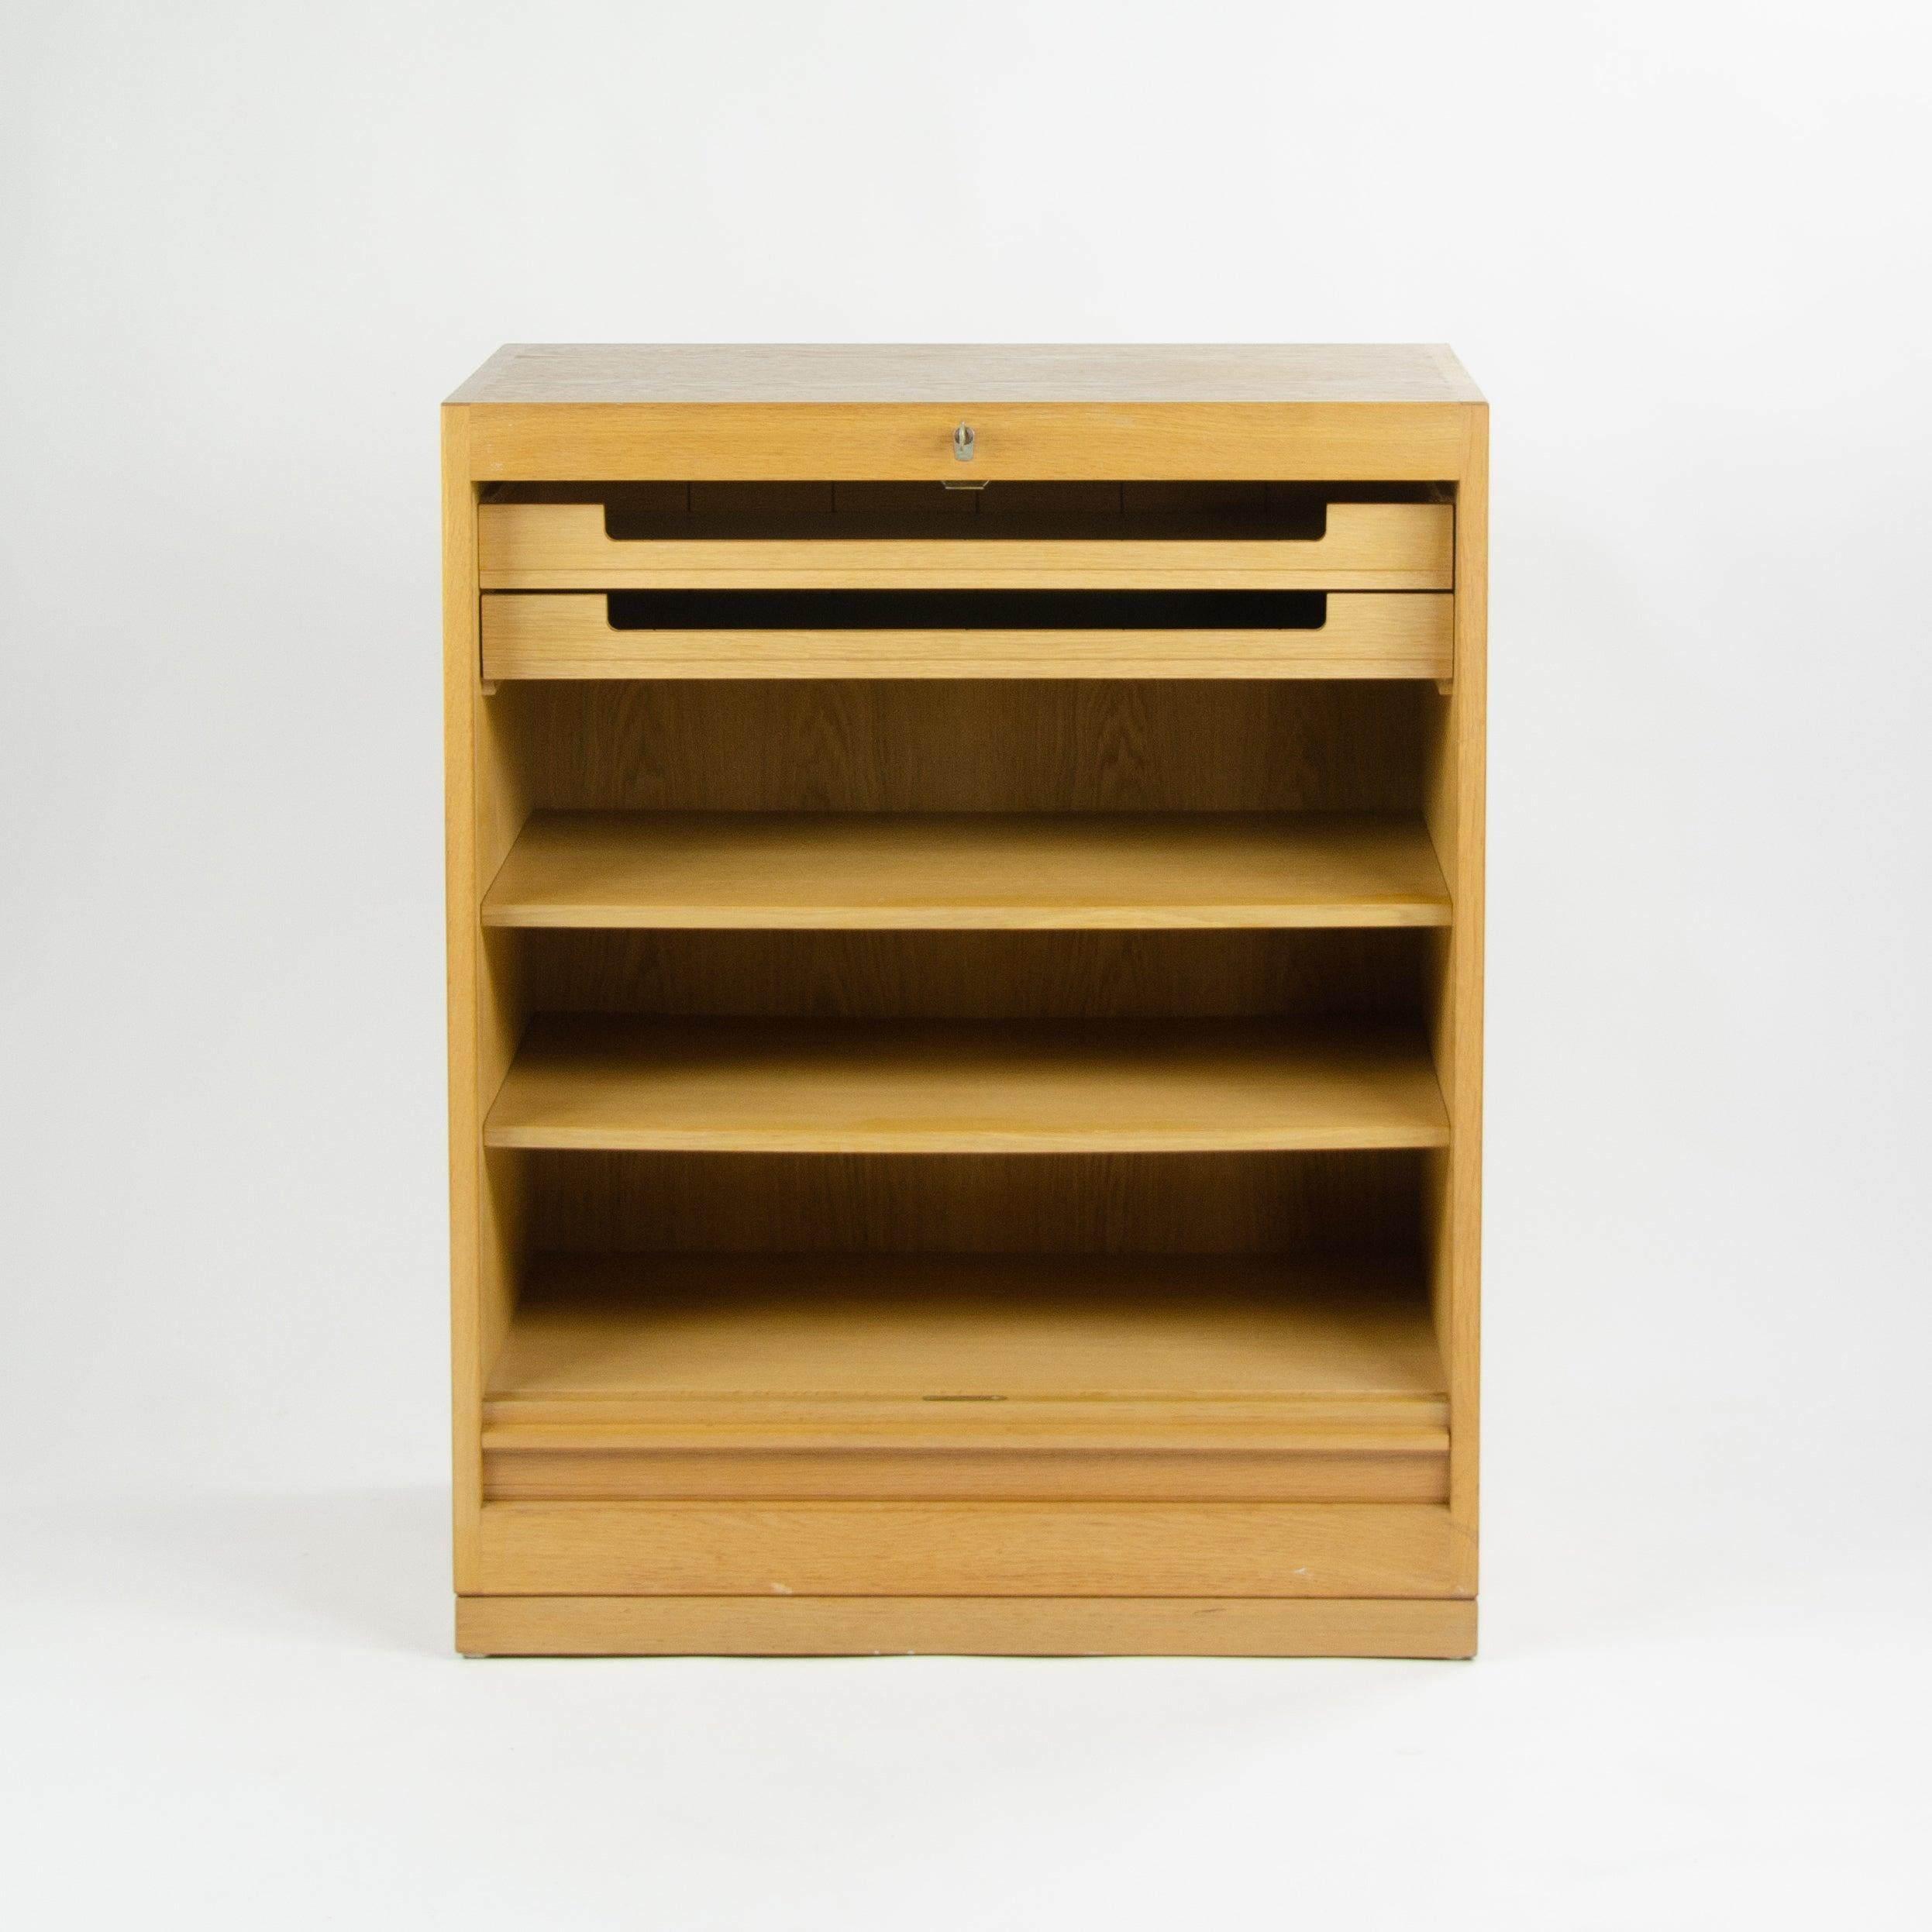 Listed for sale is a rare vintage Hans Wegner for Johannes Hansen of Denmark oak tambour storage unit/cabinet. This rare cabinet was part of a larger storage system, which allowed for the creation of fabulous modules for storage.


This example